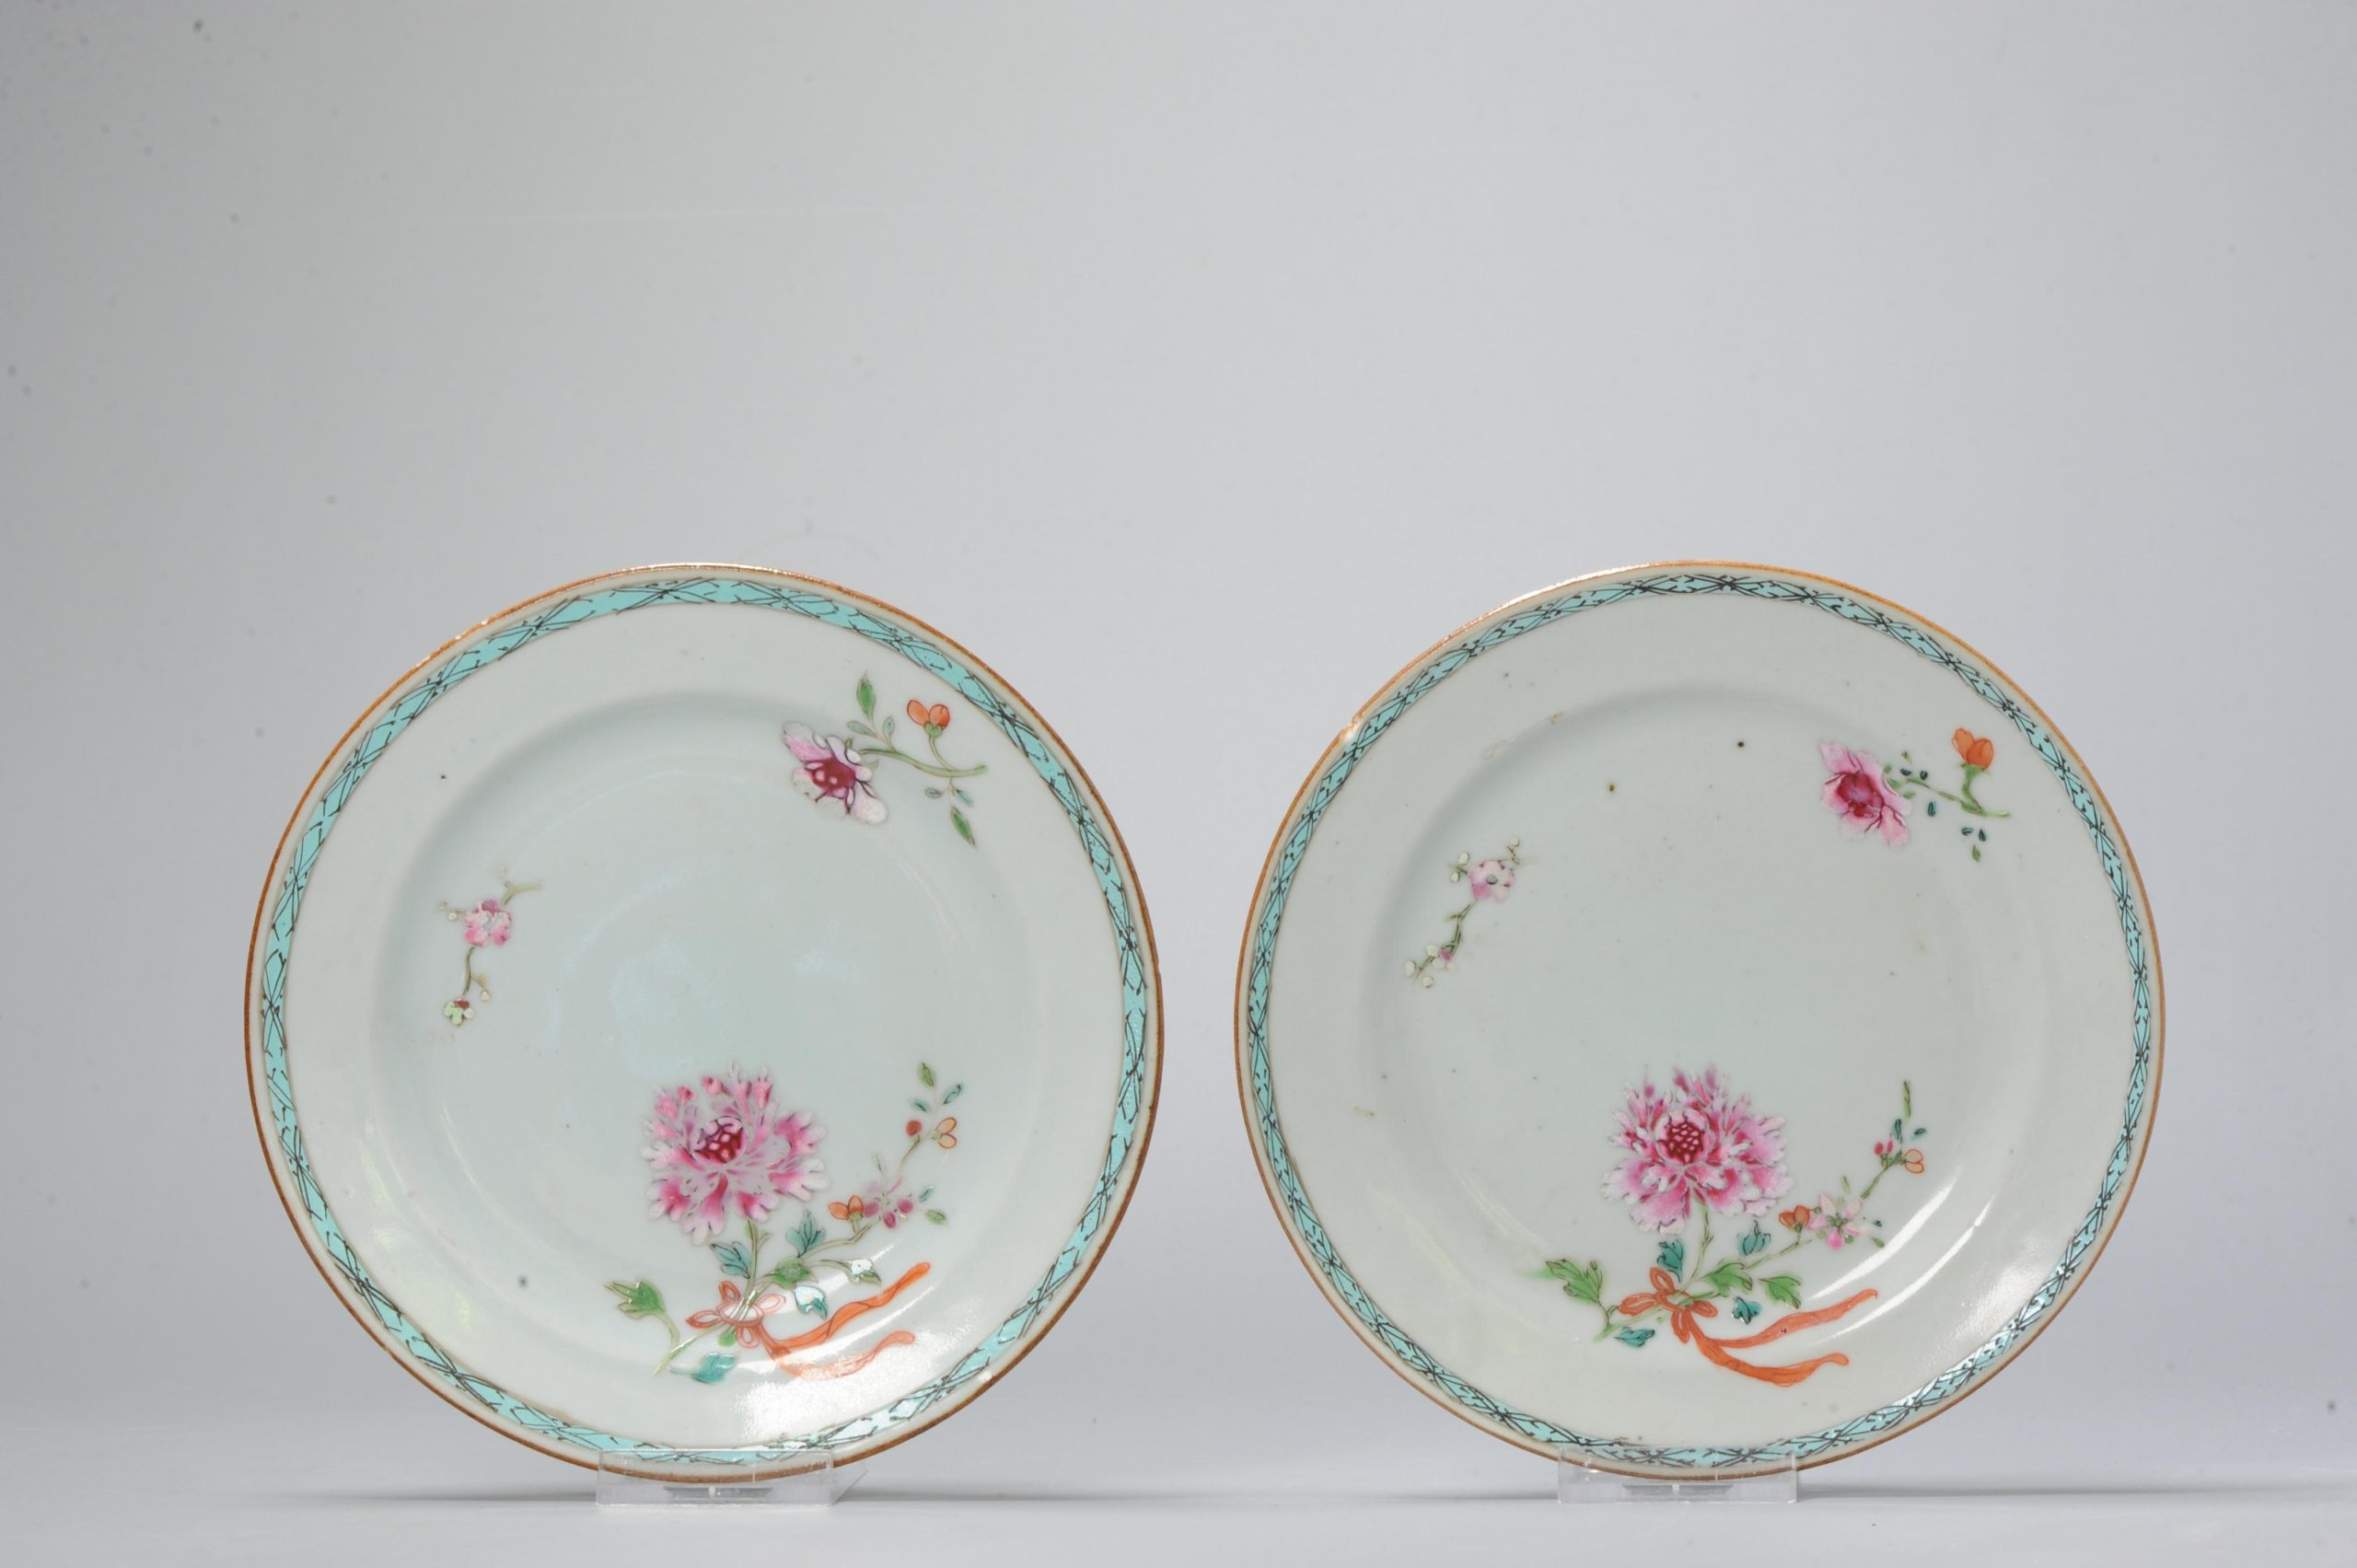 Pair Antique 18th C Chinese Porcelain Desert Plate  Dish Famille Rose Qing period